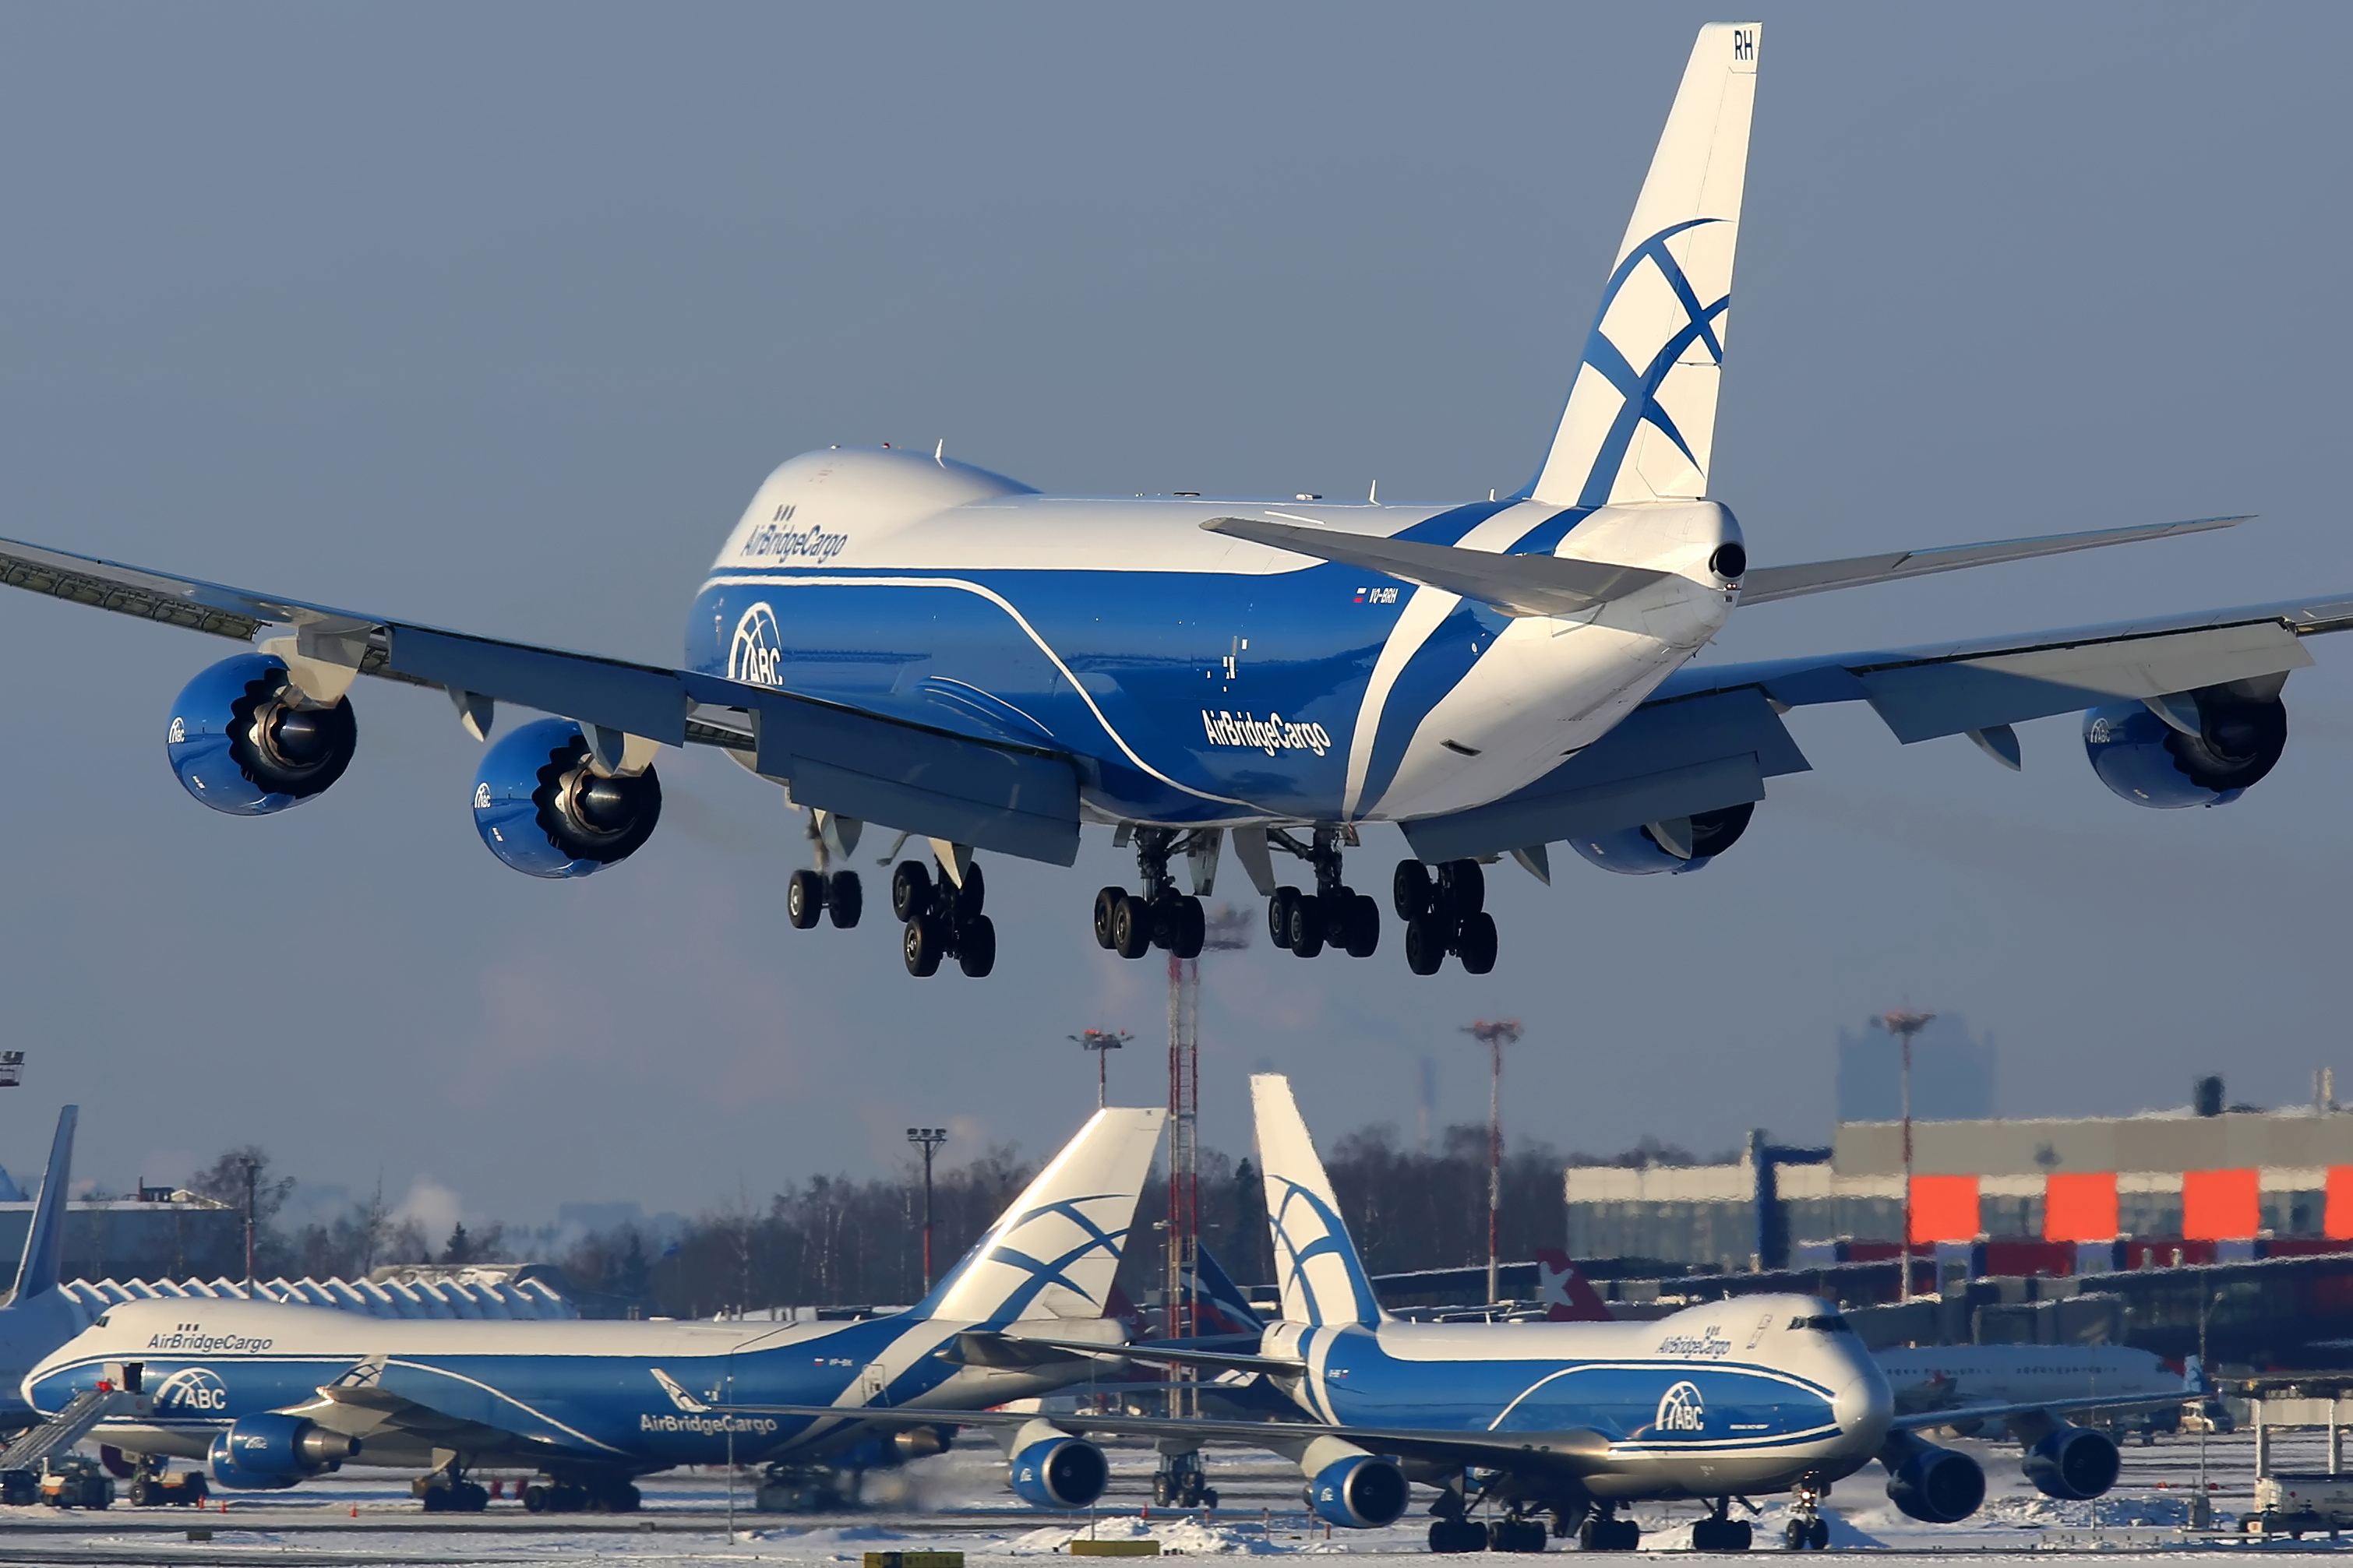 AirBridgeCargo Airlines (ABC) has become the fifth freighter operator to provide scheduled service at Rickenbacker International Airport (LCK). Click to enlarge.